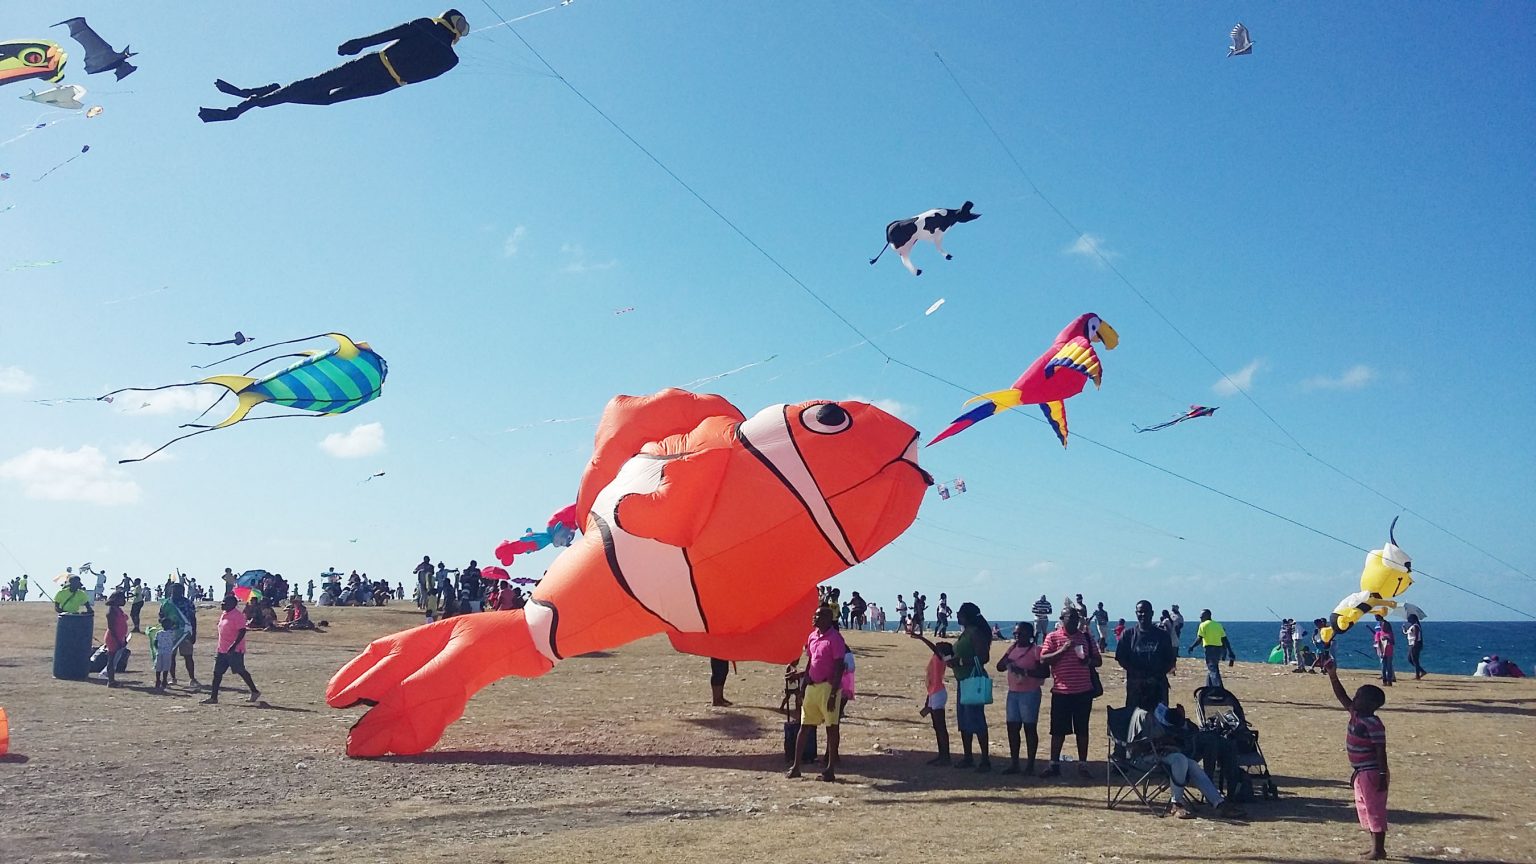 Residents urged to get creative for 15th annual International Kite